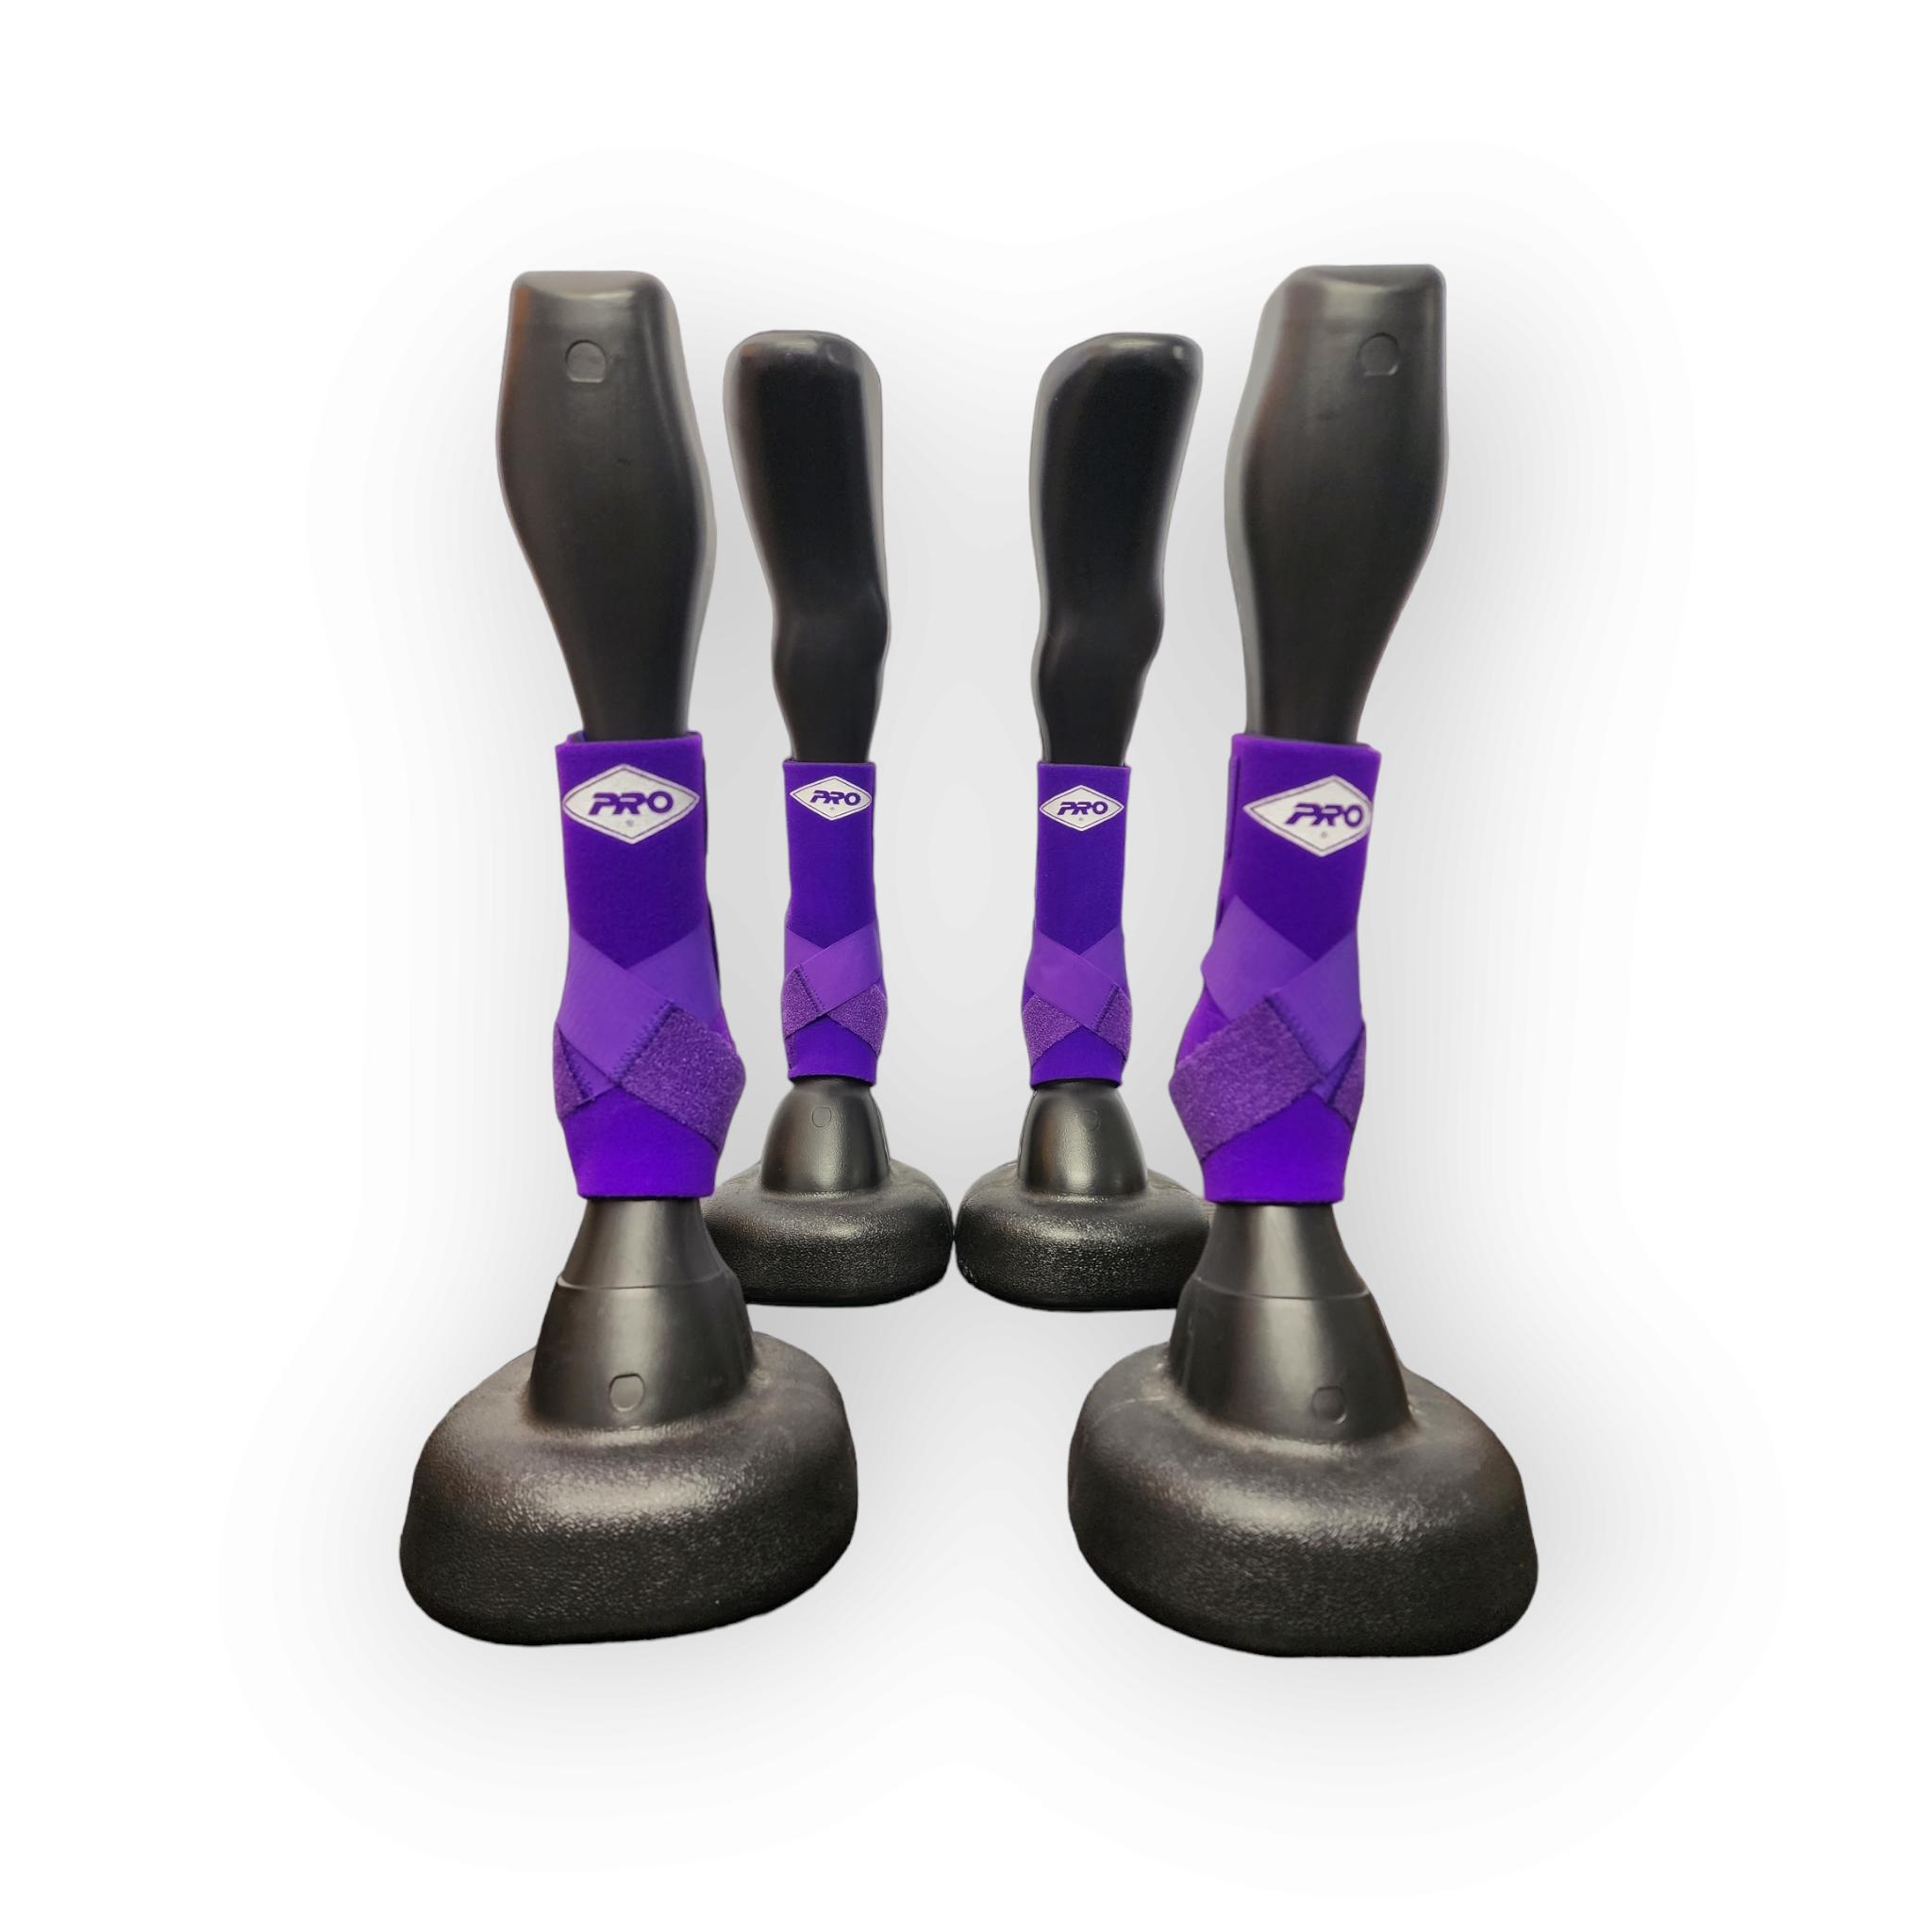 Purple Pro Orthopedic Equine Sports Support Boots set of 4 - IN STOCK